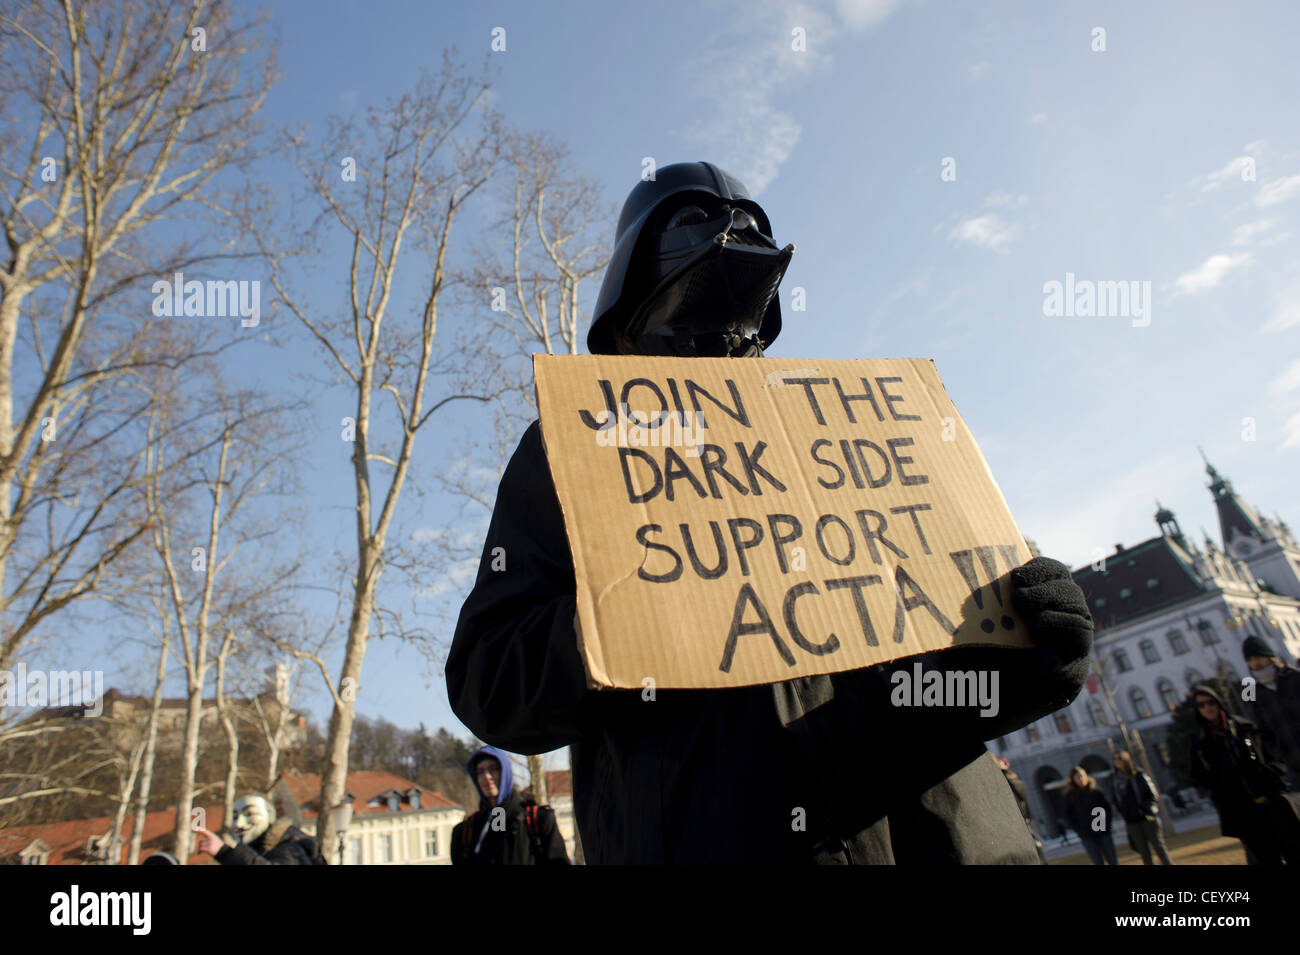 A protester dressed up as Darth Vader holds a sign that reads 'Join the dark side support ACTA'. Stock Photo